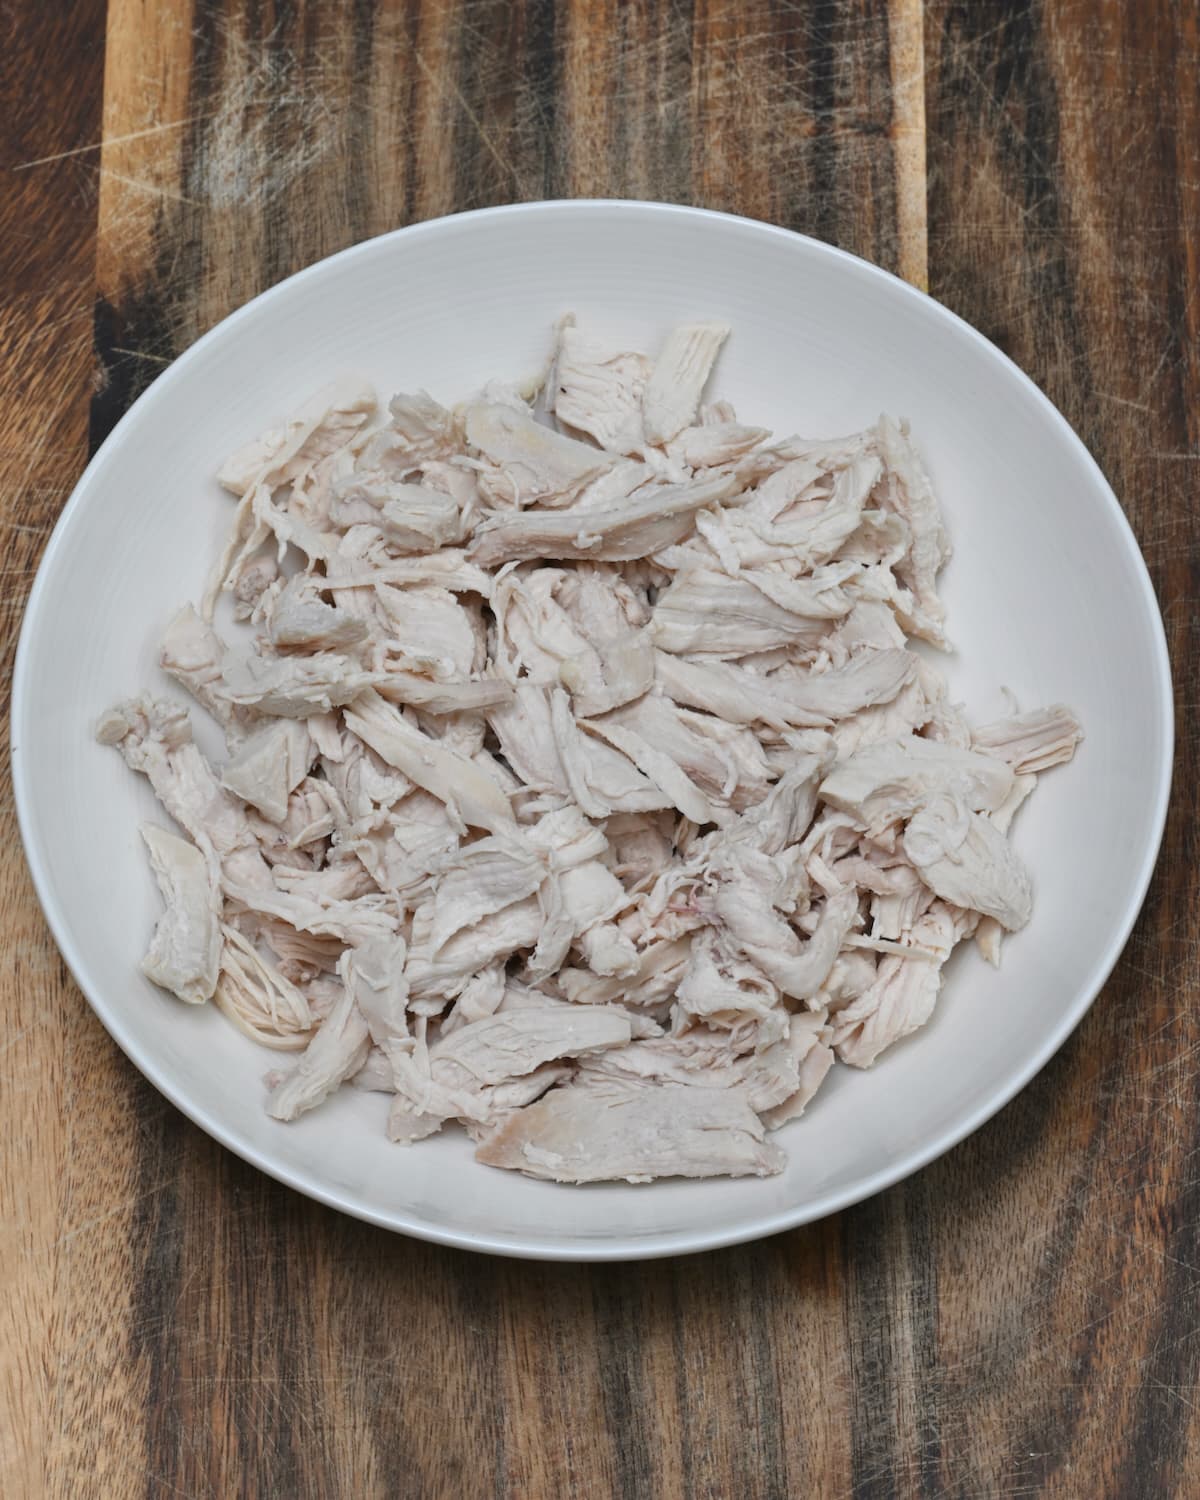 A bowl with shredded boiled chicken